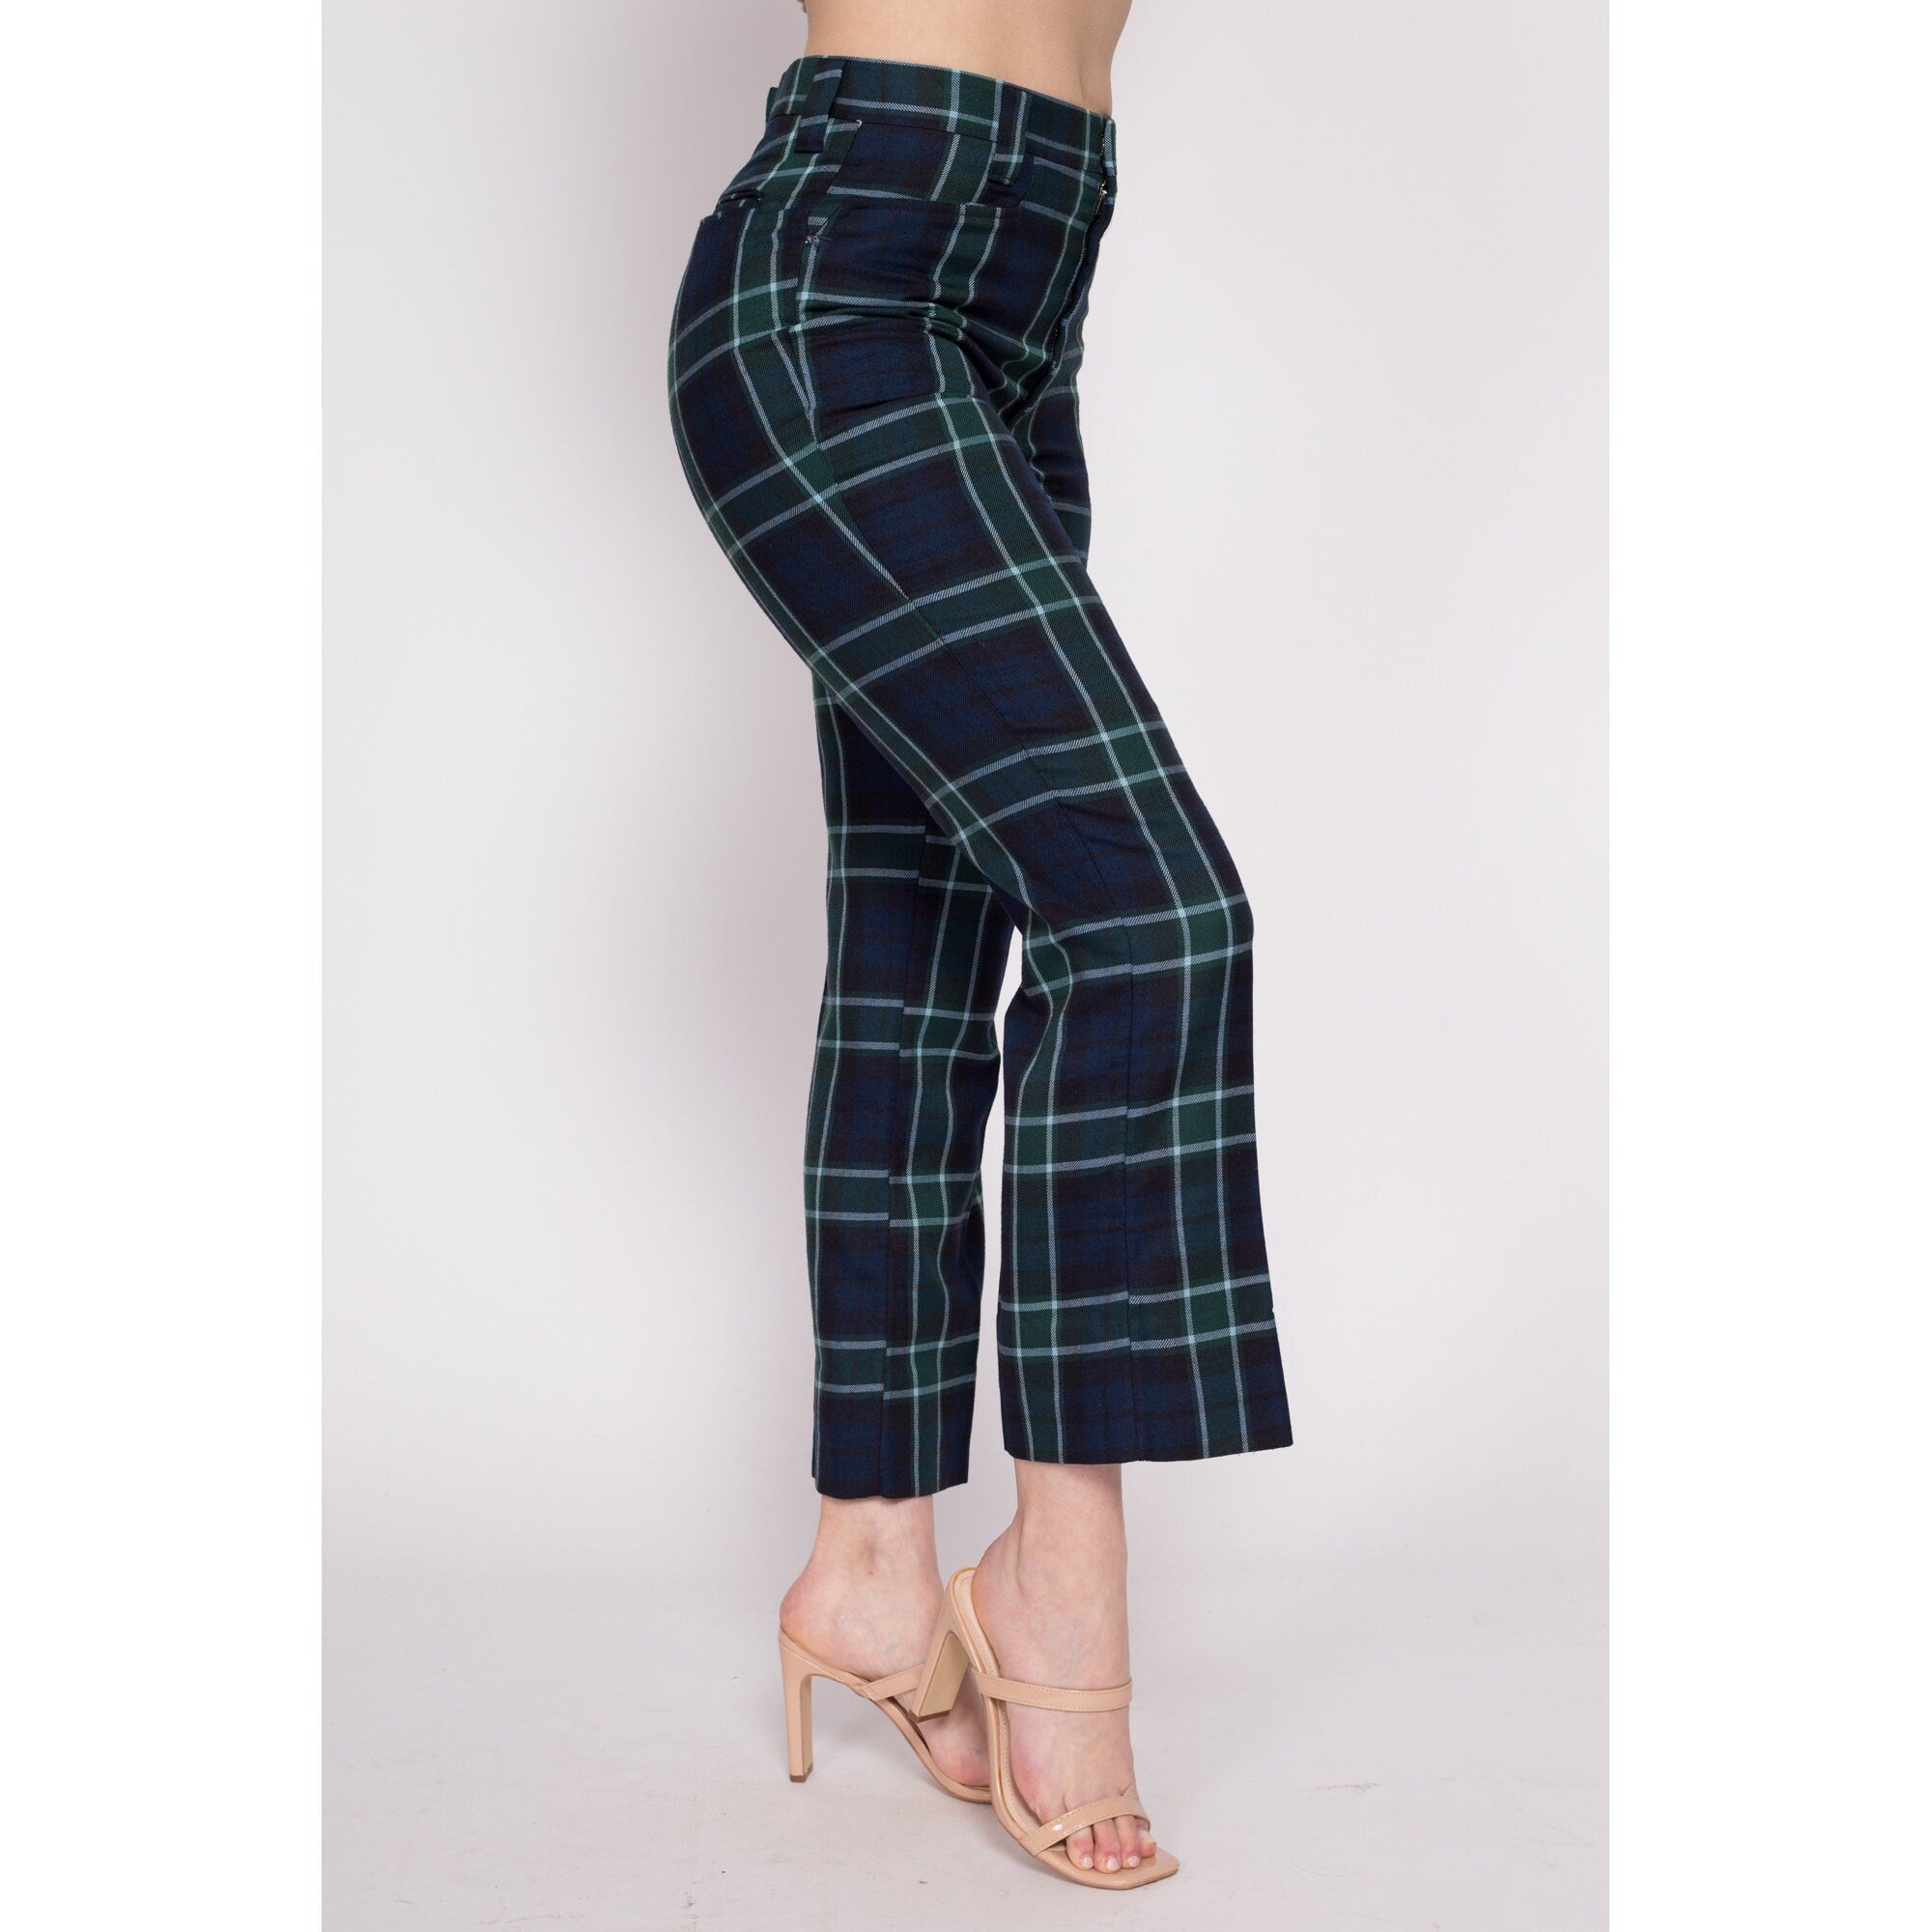 90s Plaid Wide Leg Trousers Hippie Vintage Checkered Bell Bottom Flare  Pants 